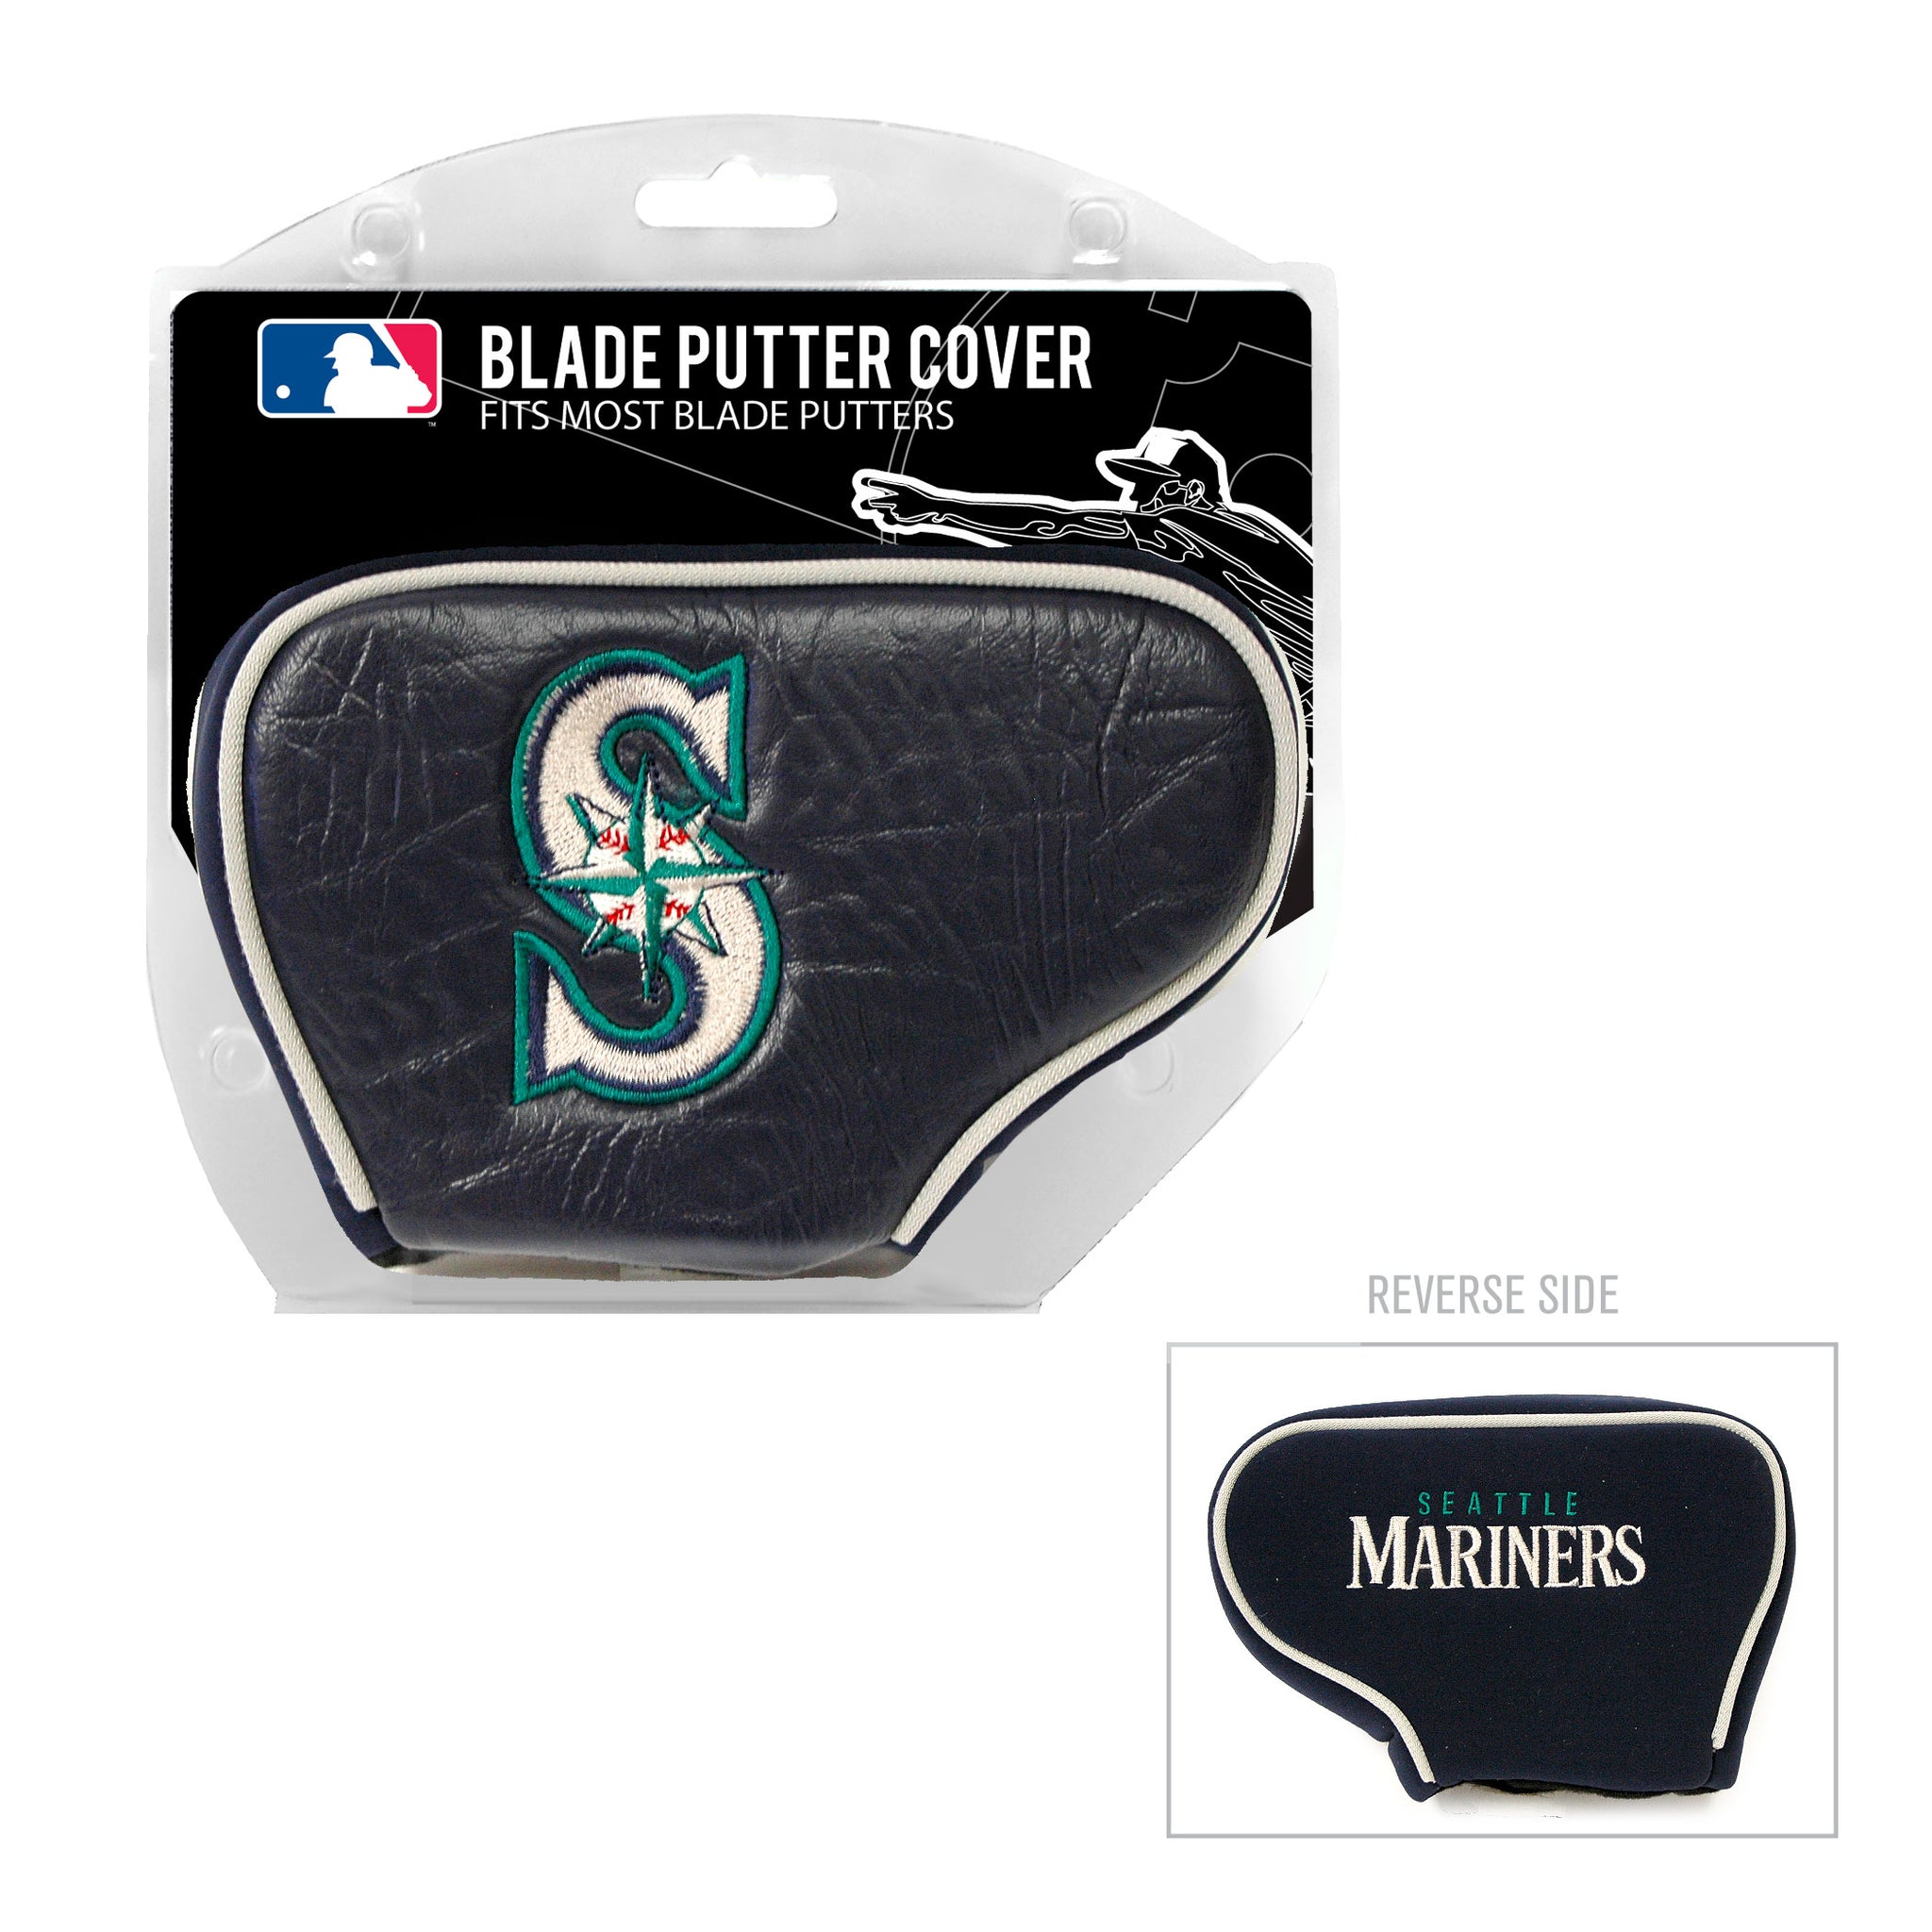 SEATTLE MARINERS BLADE PC